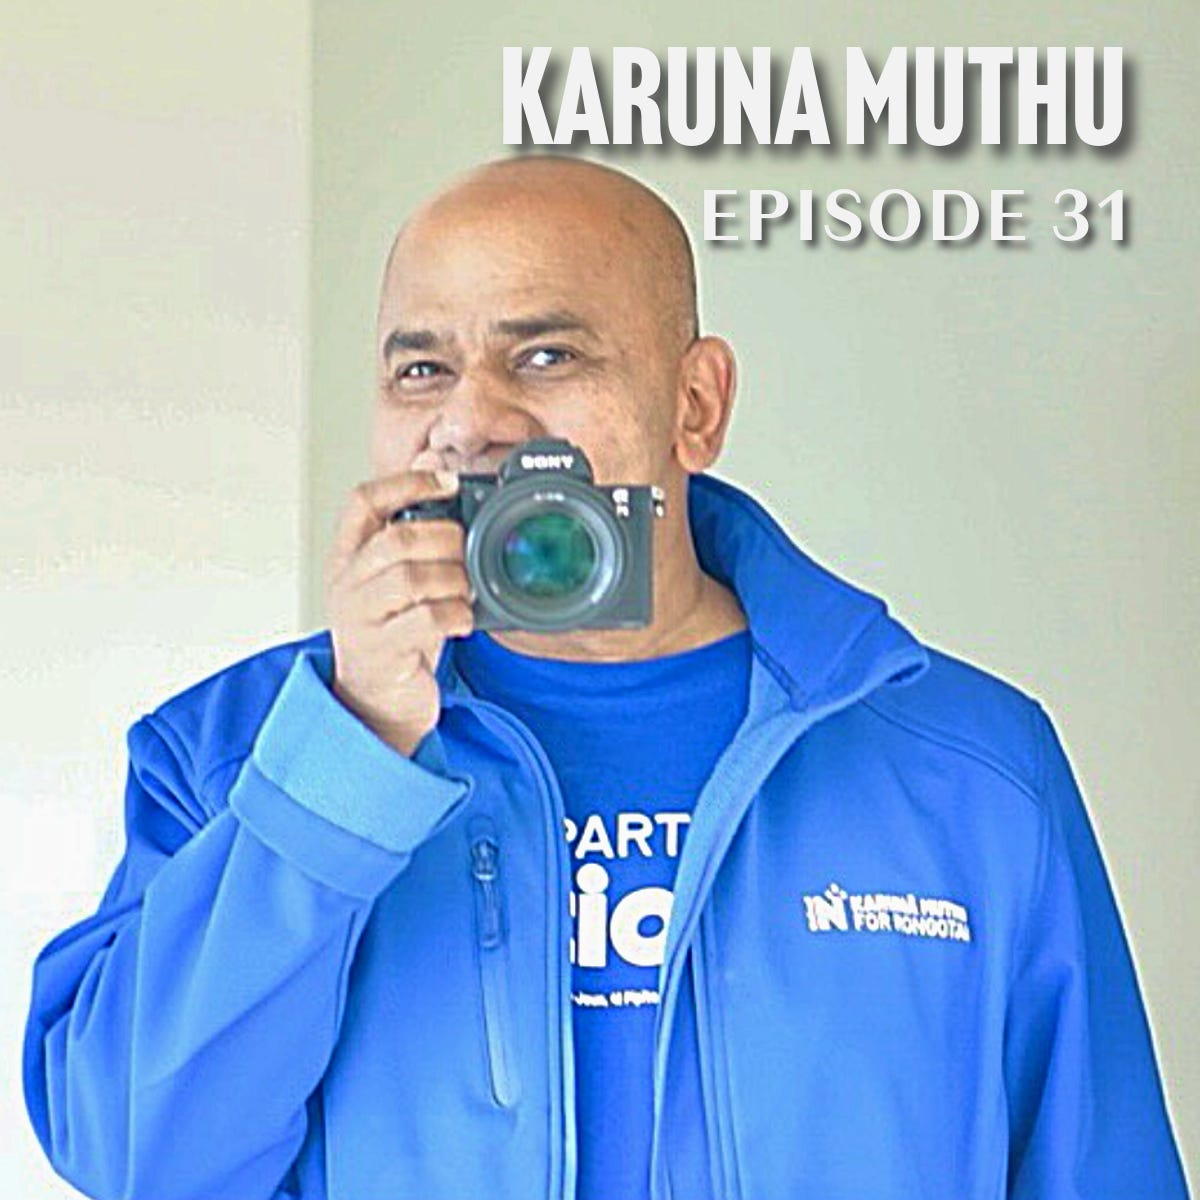 The Therapeutic Ritual of Capturing and Editing Photos - Ep.31 - Karuna Muthu